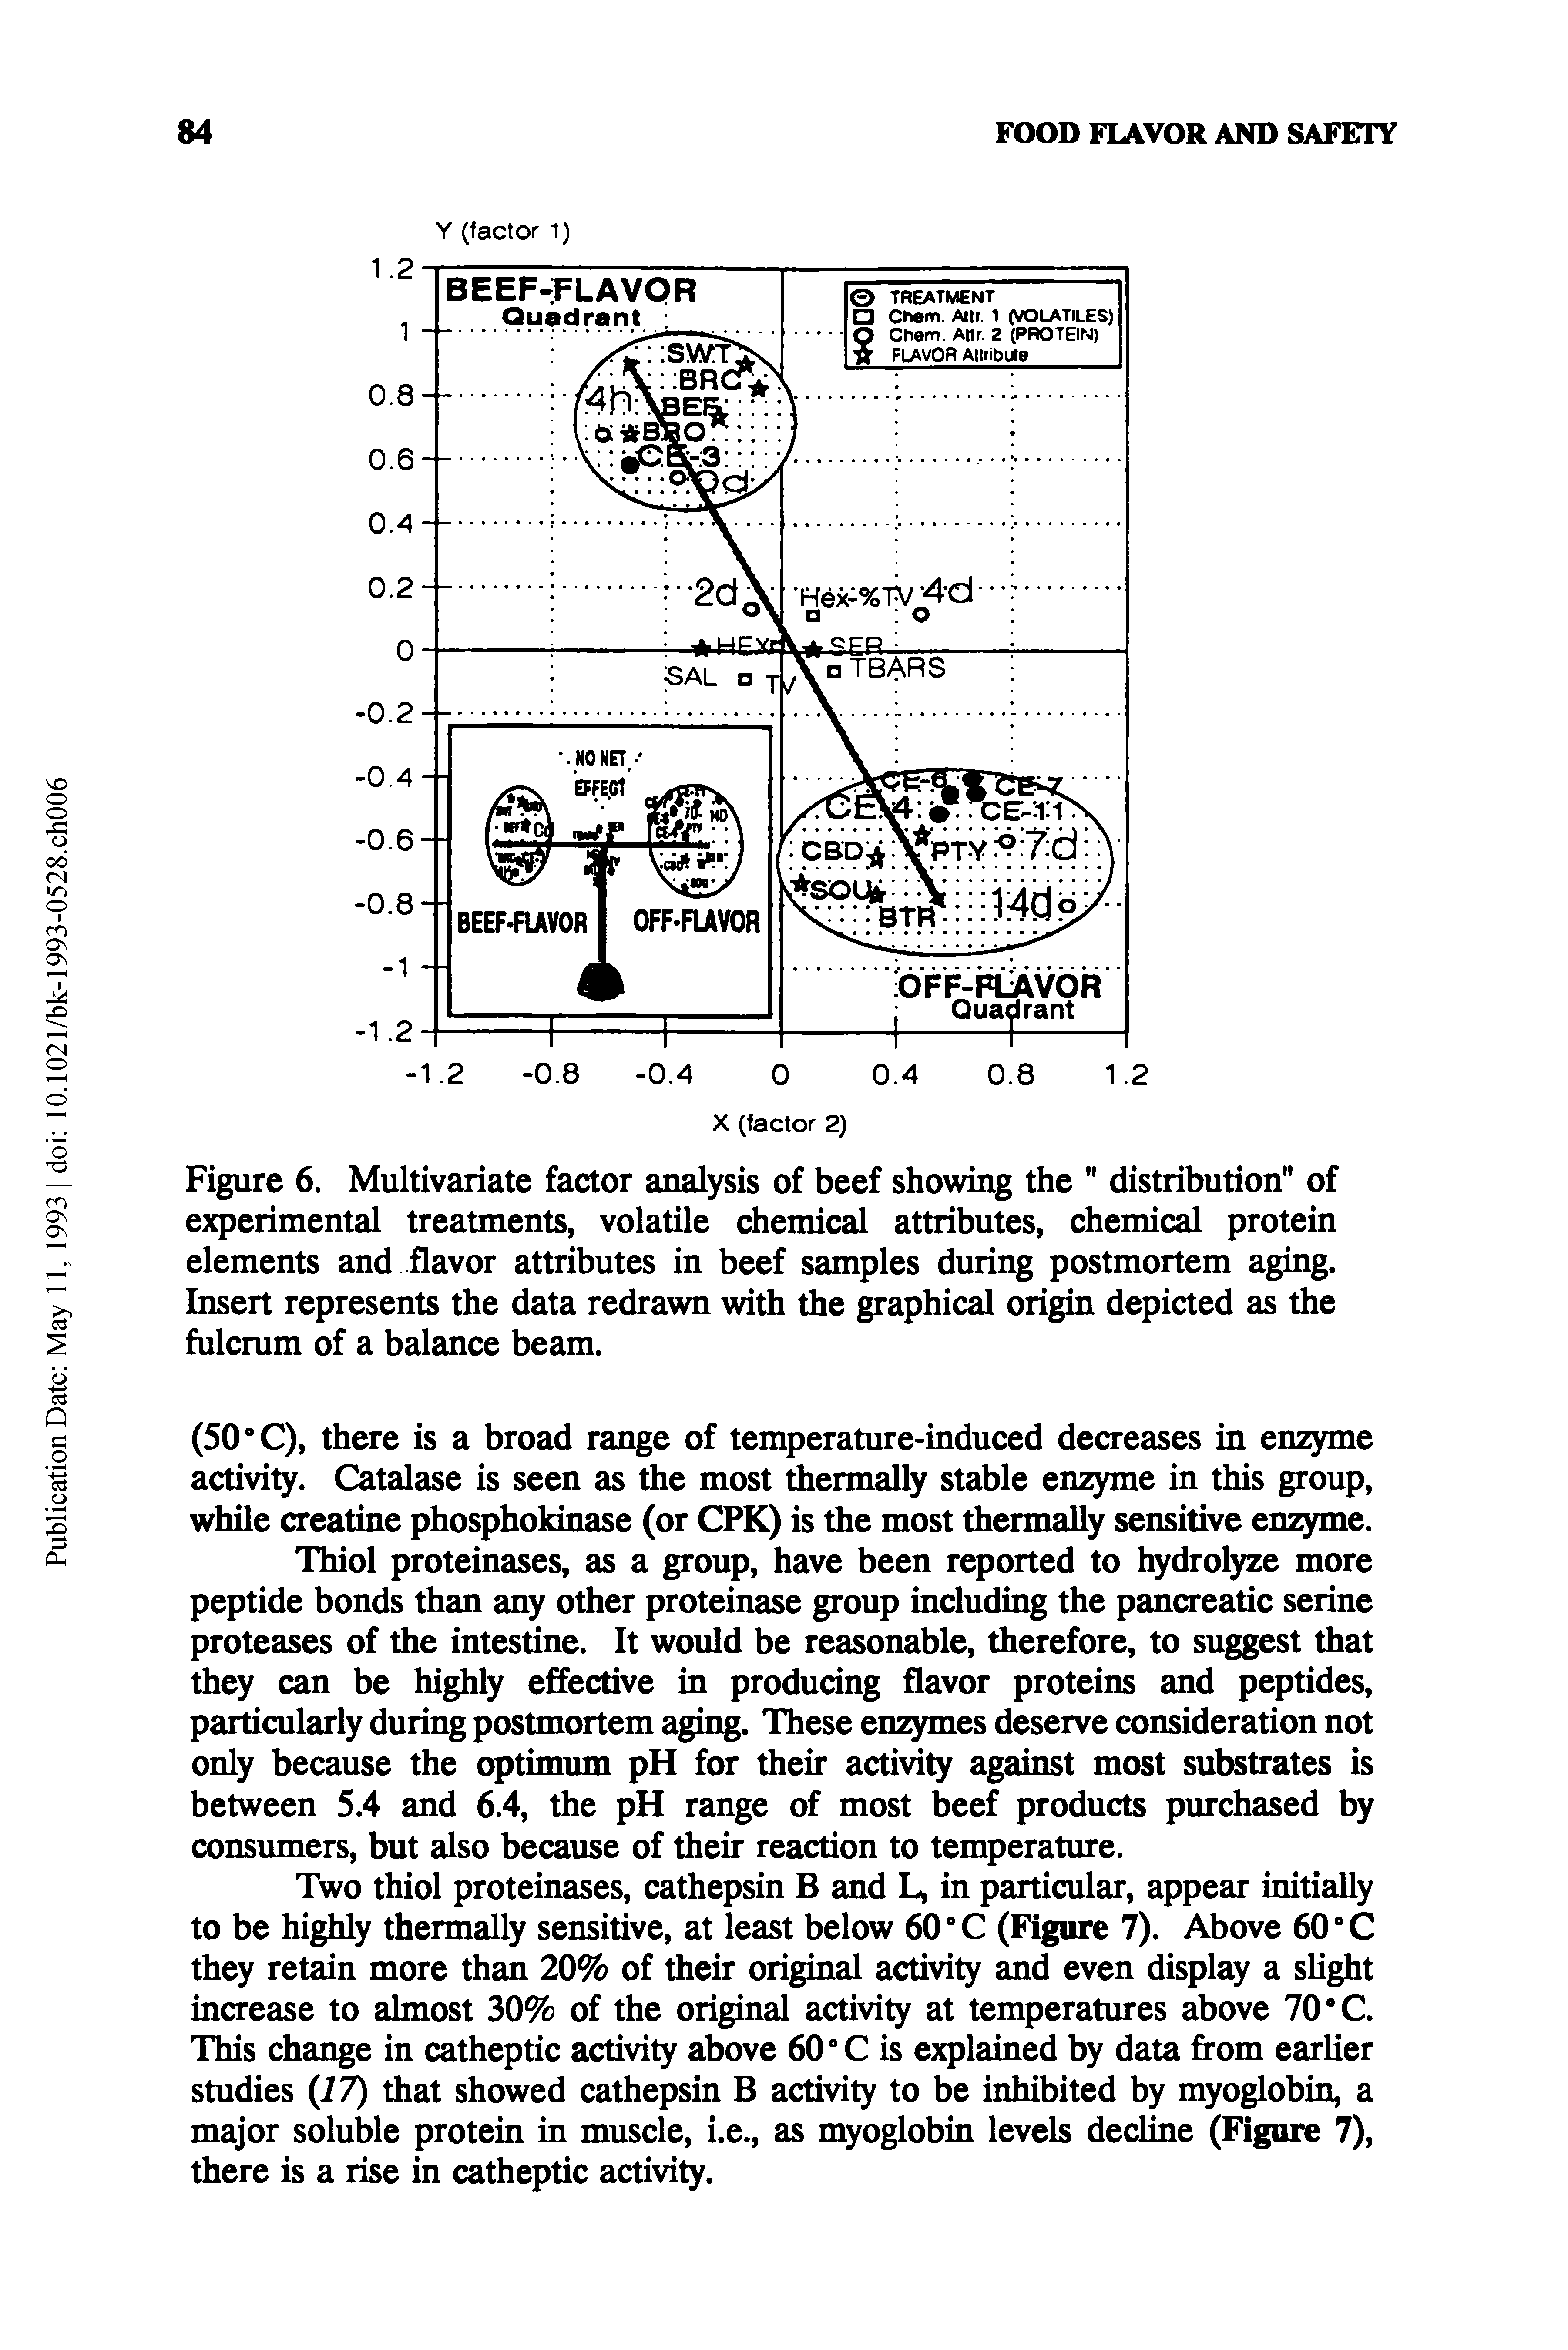 Figure 6. Multivariate factor analysis of beef showing the " distribution" of experimental treatments, volatile chemical attributes, chemical protein elements and flavor attributes in beef samples during postmortem aging. Insert represents the data redrawn with the graphical origin depicted as the fulcrum of a balance beam.